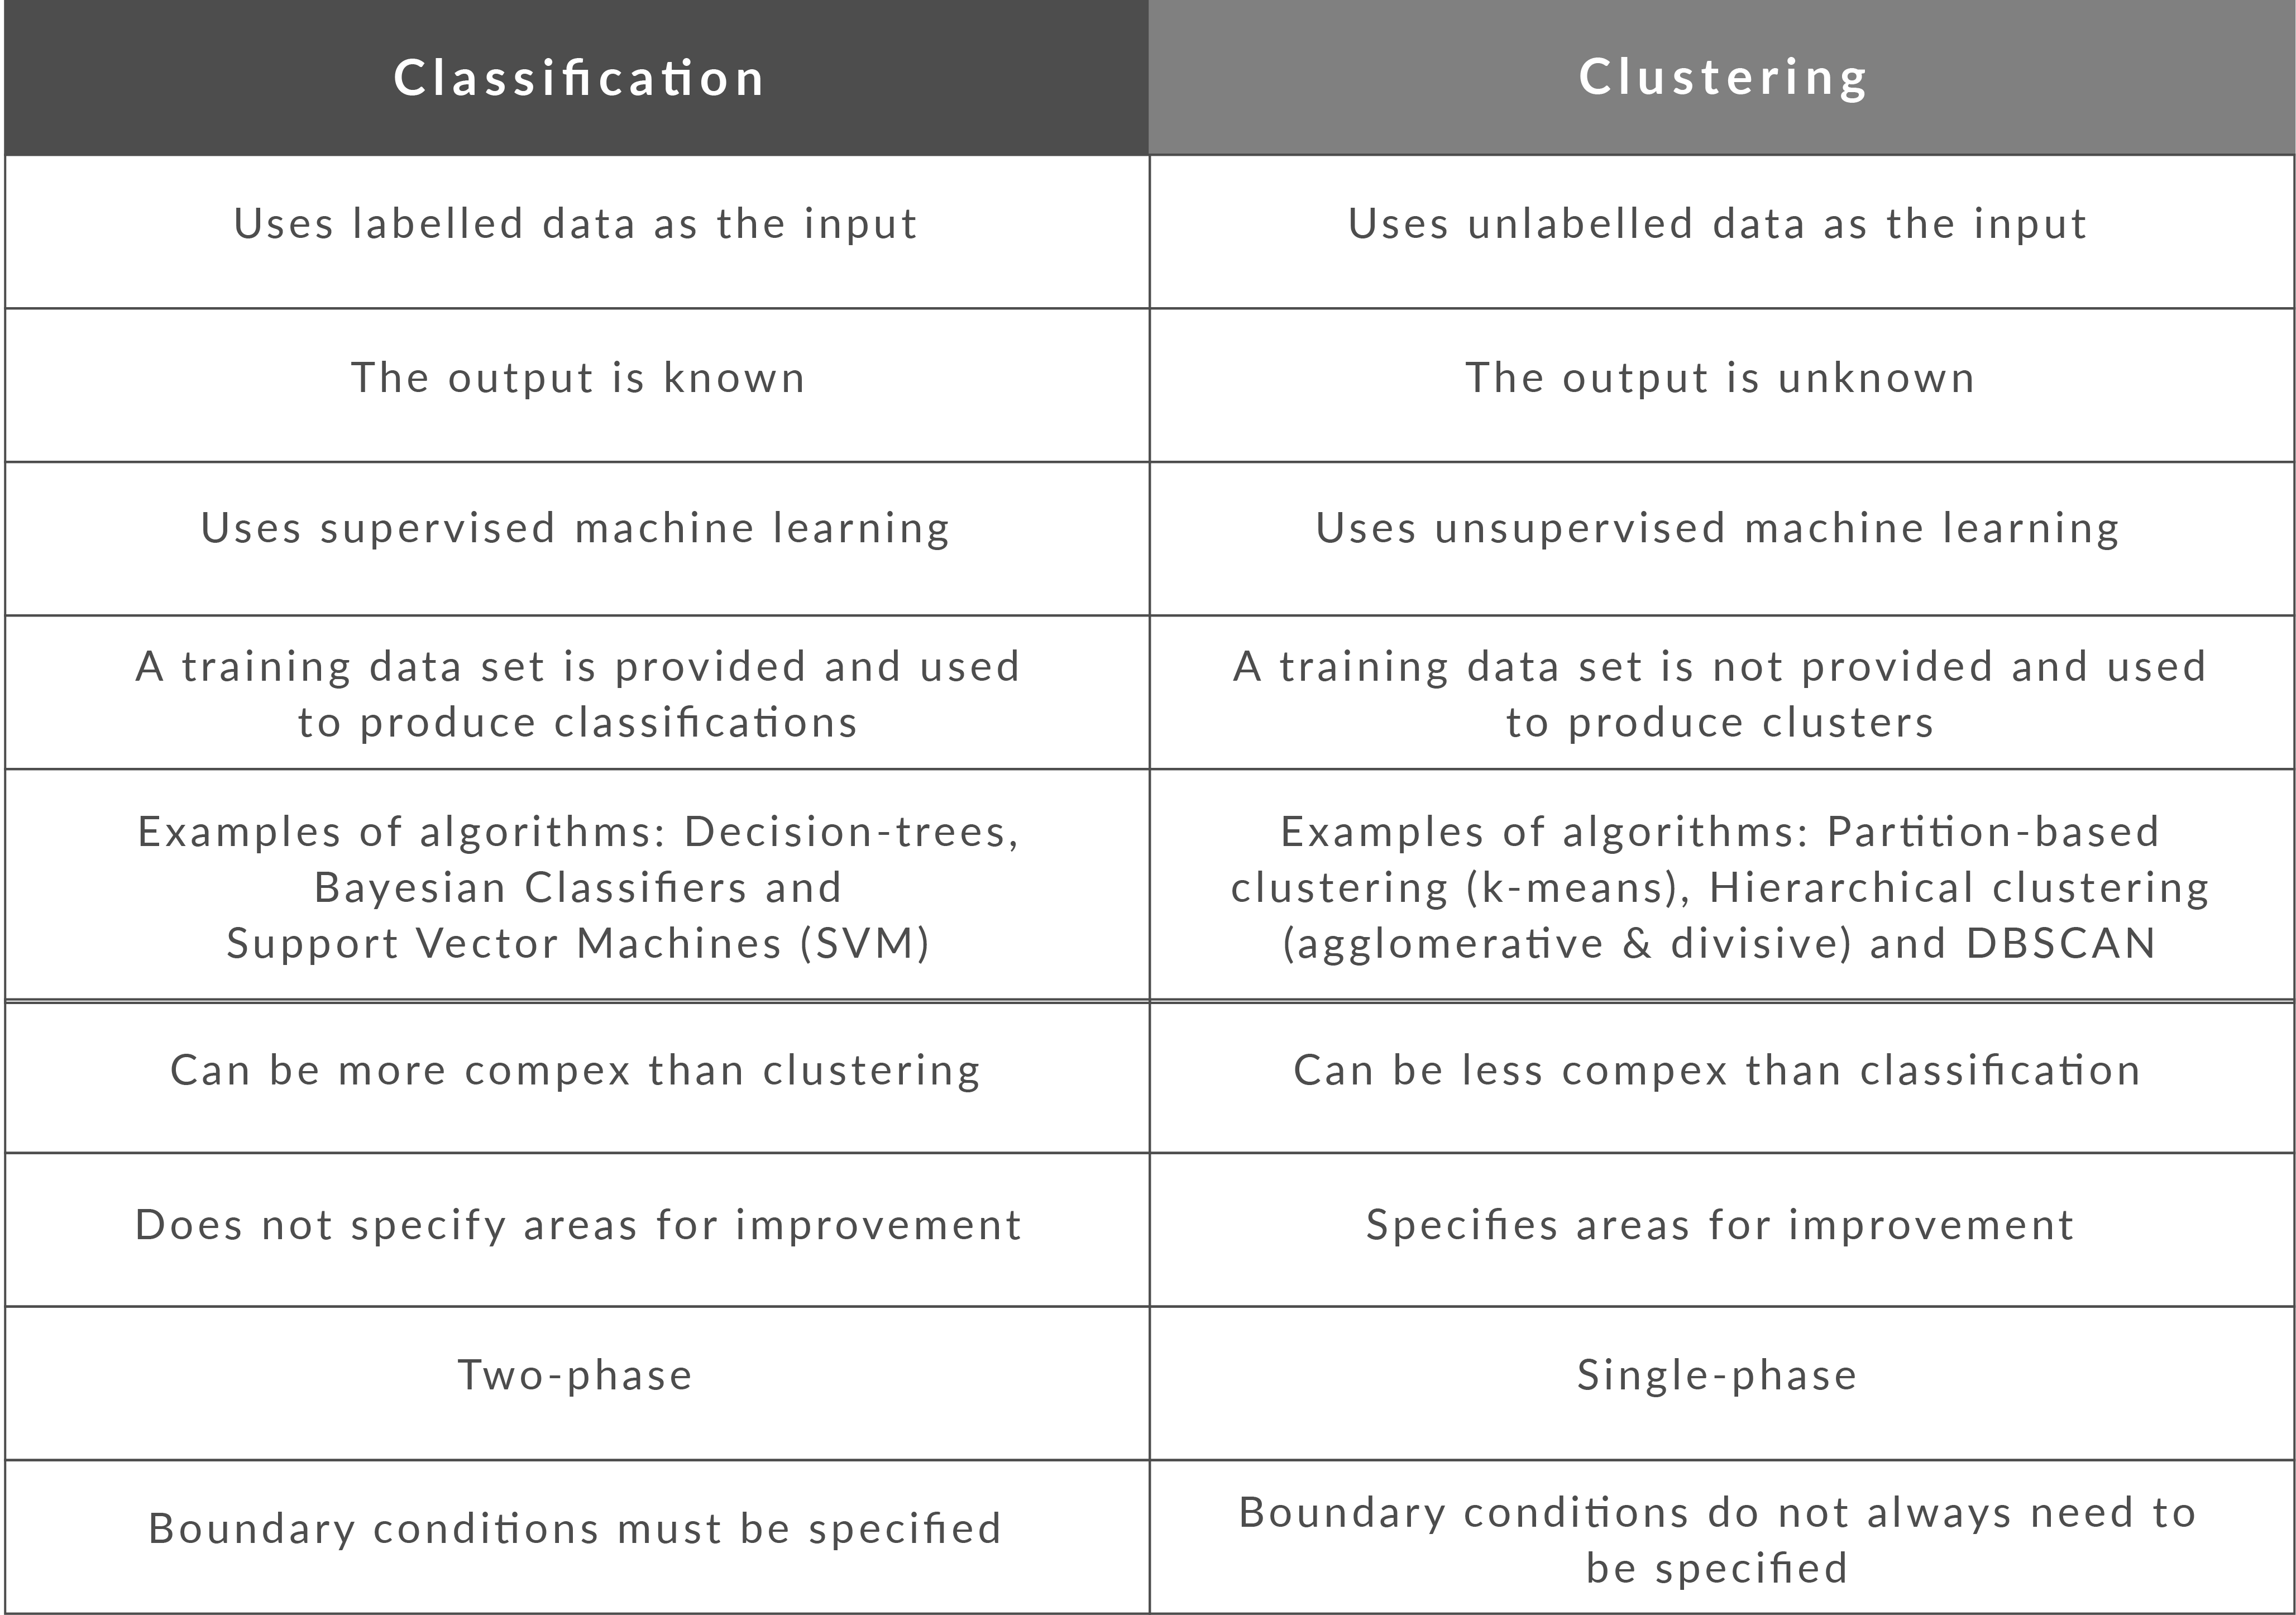 What is the difference between classifier and clustering?